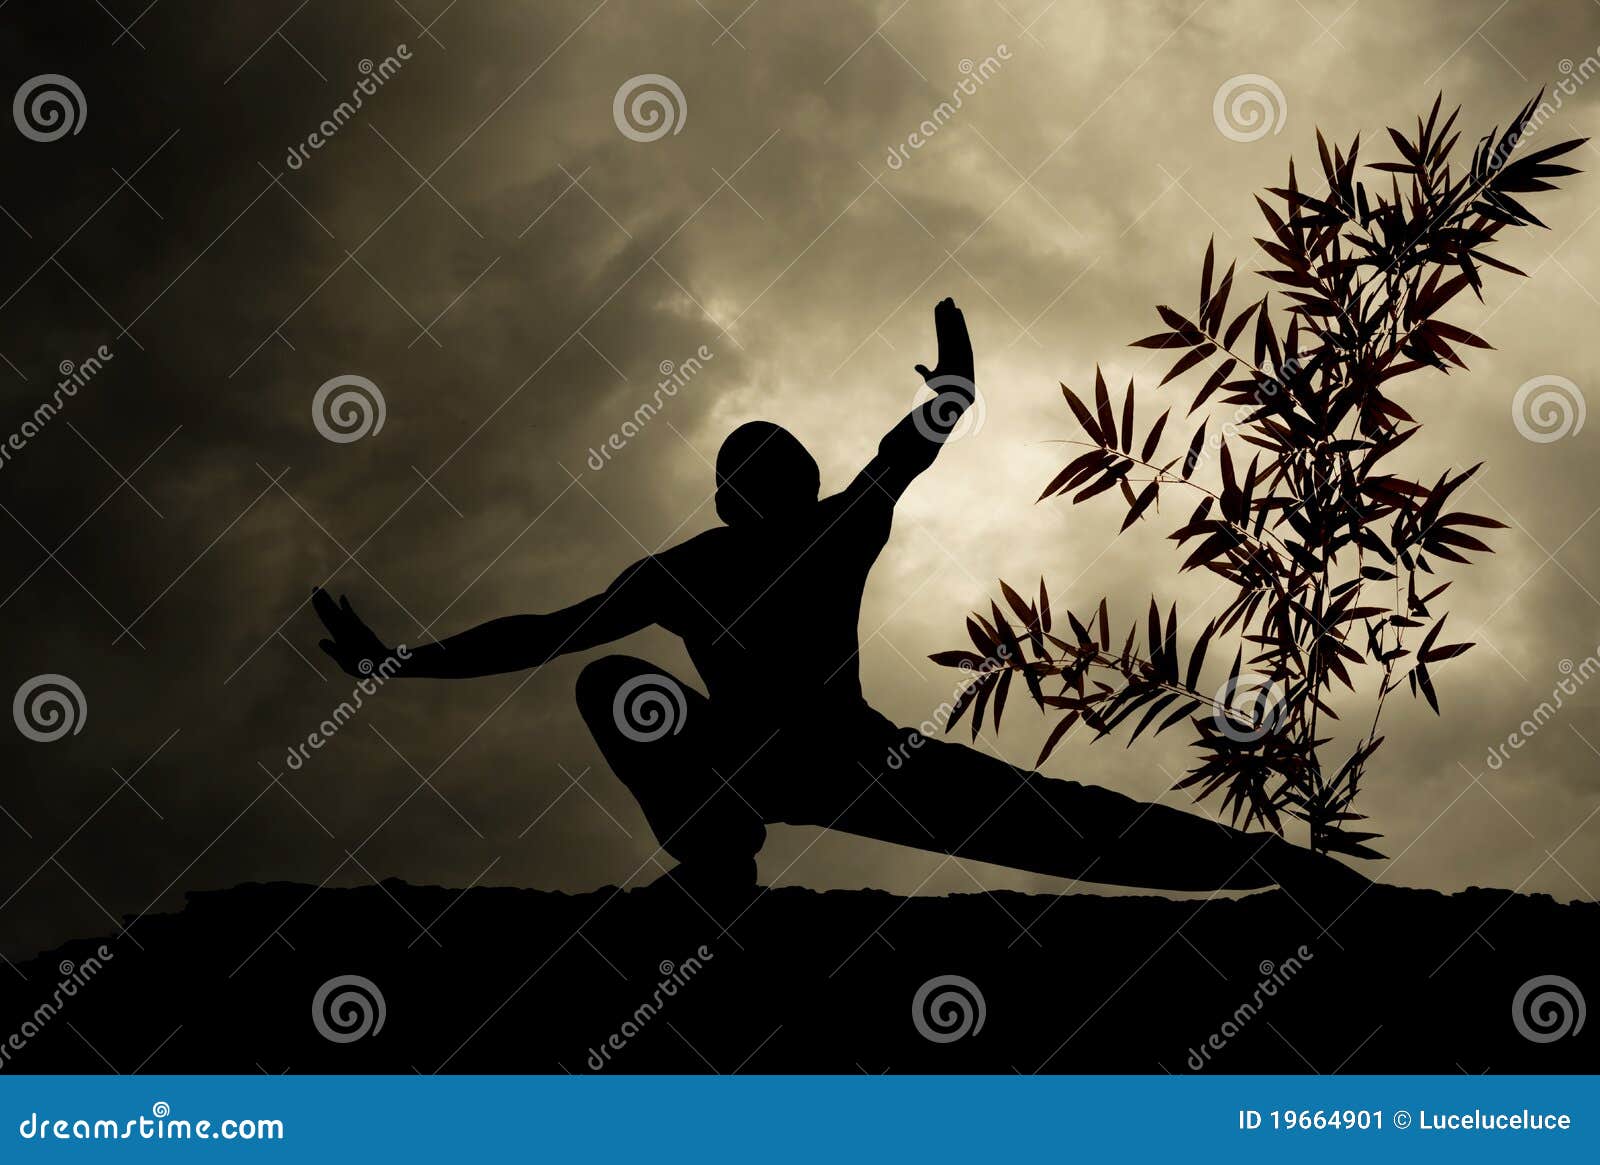 kung fu martial art background